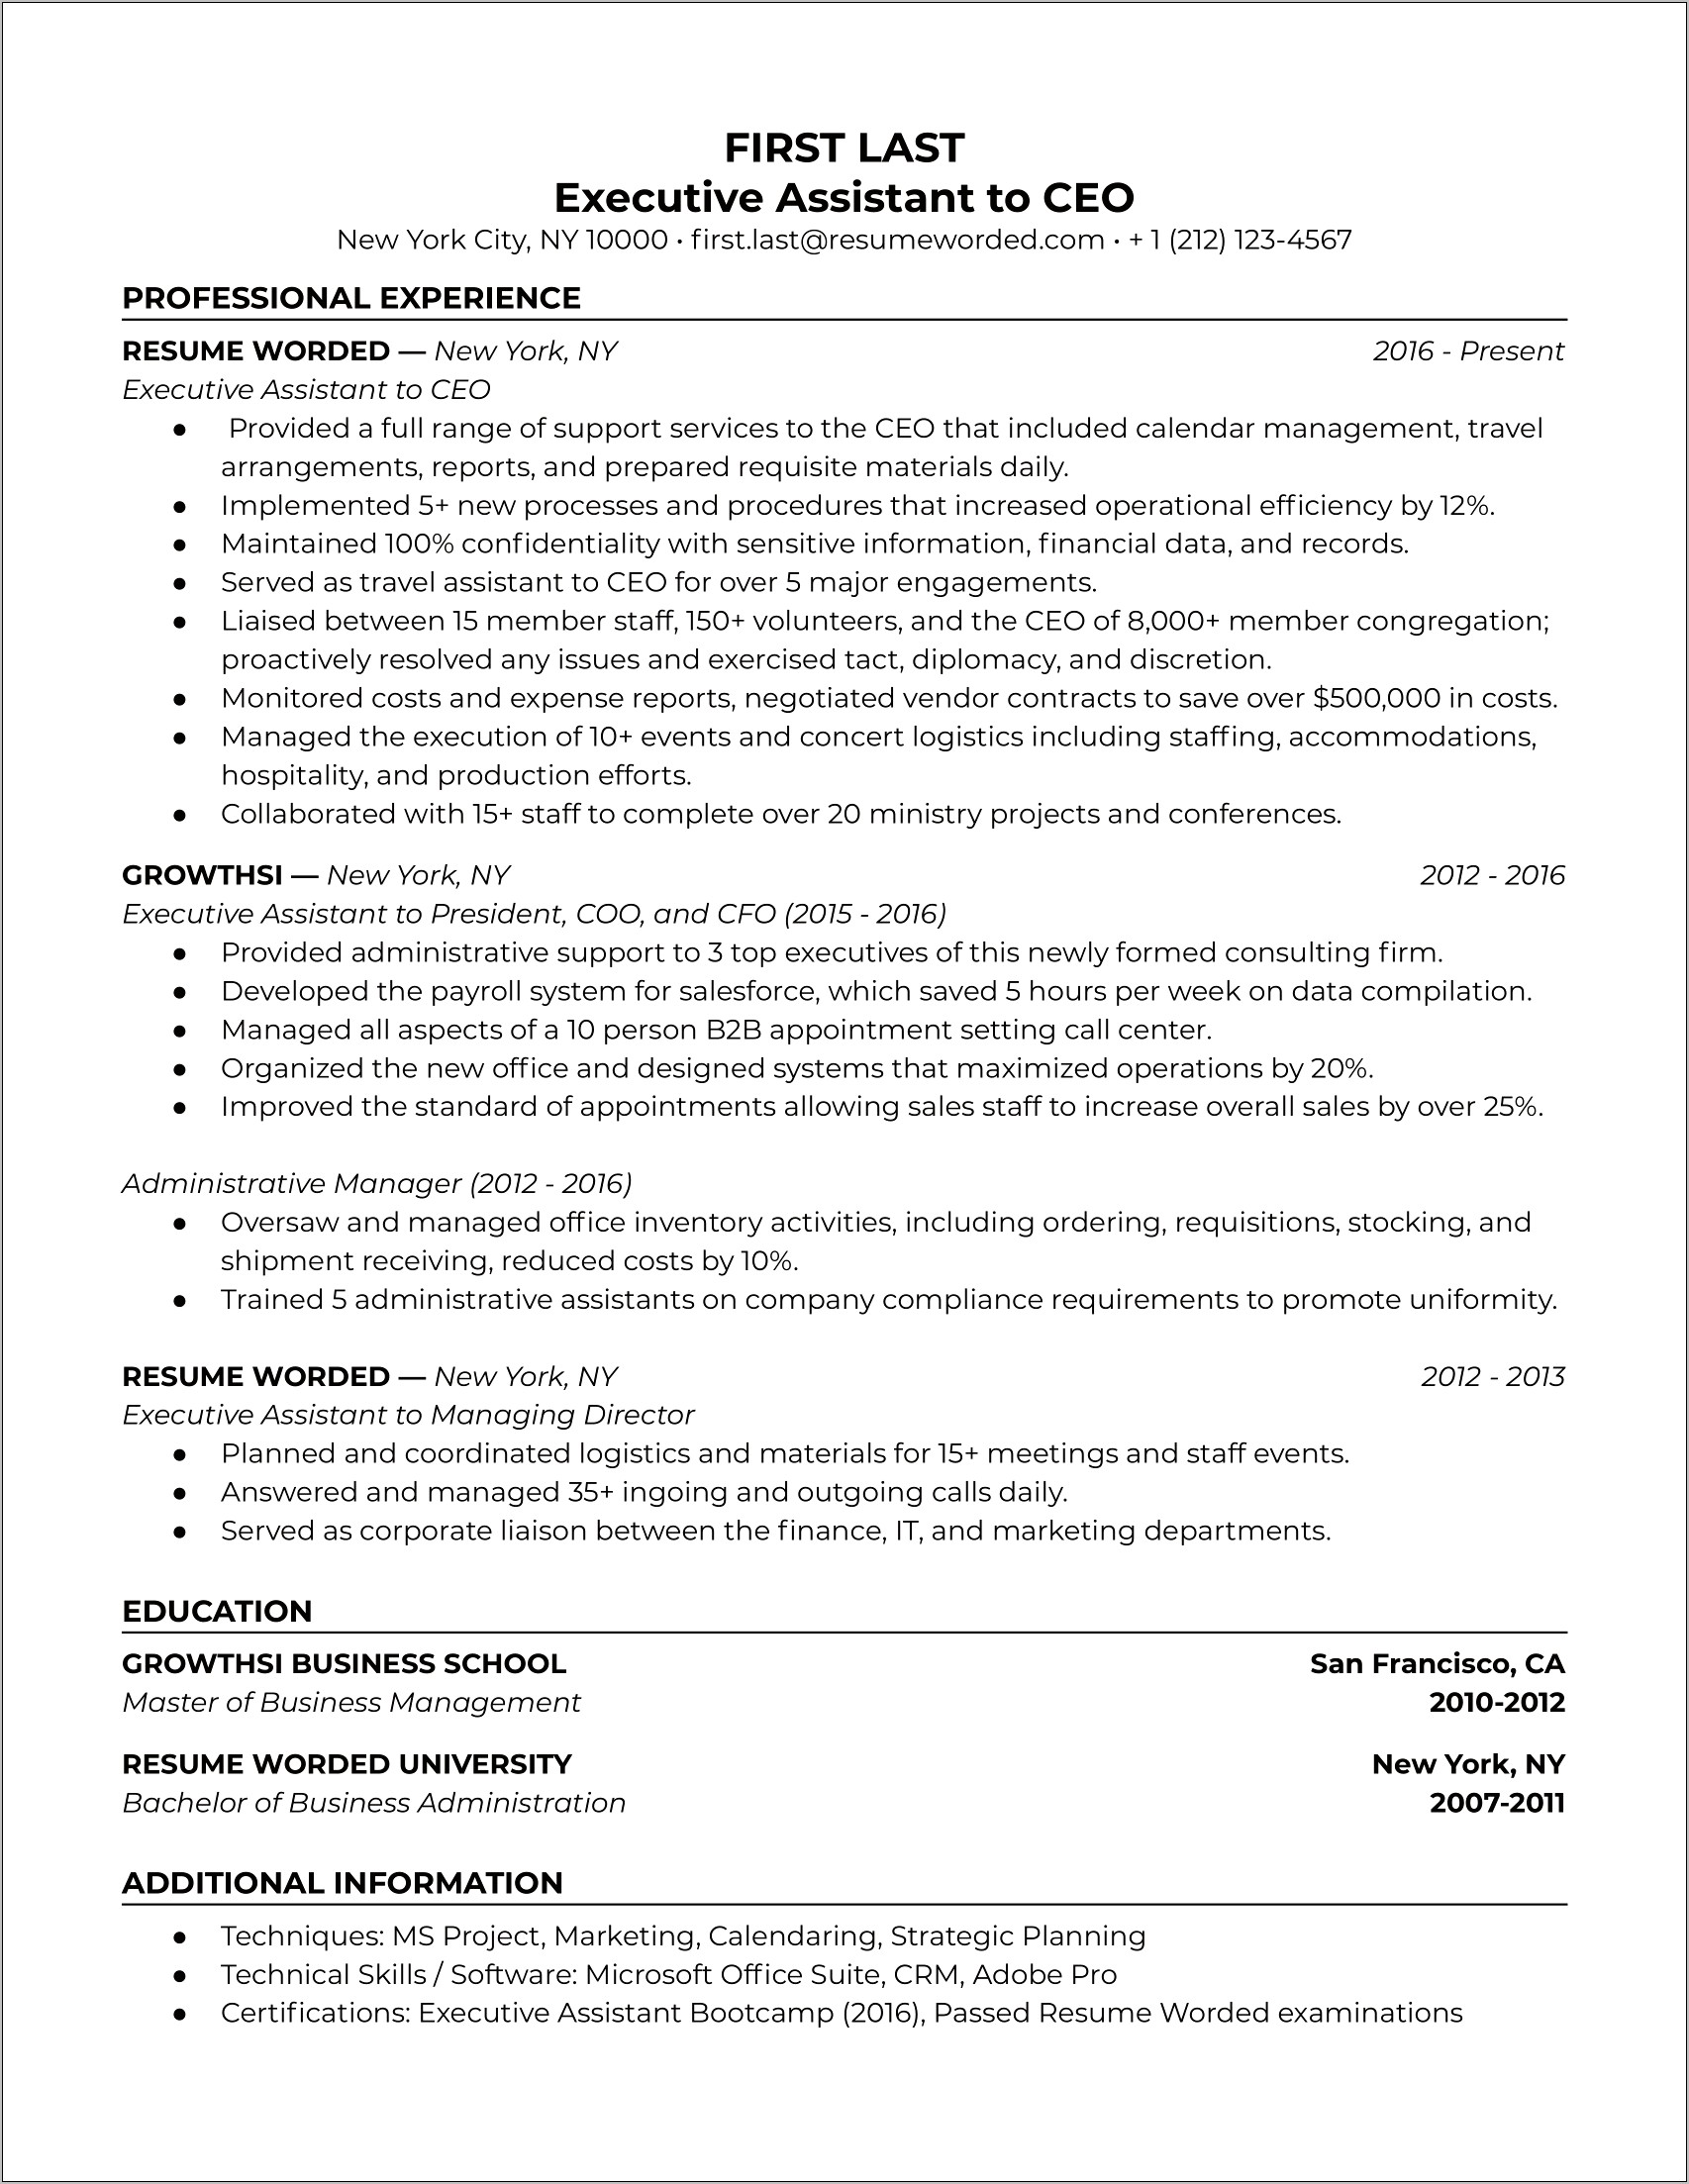 Sample Federal Resume For Administrative Assistant